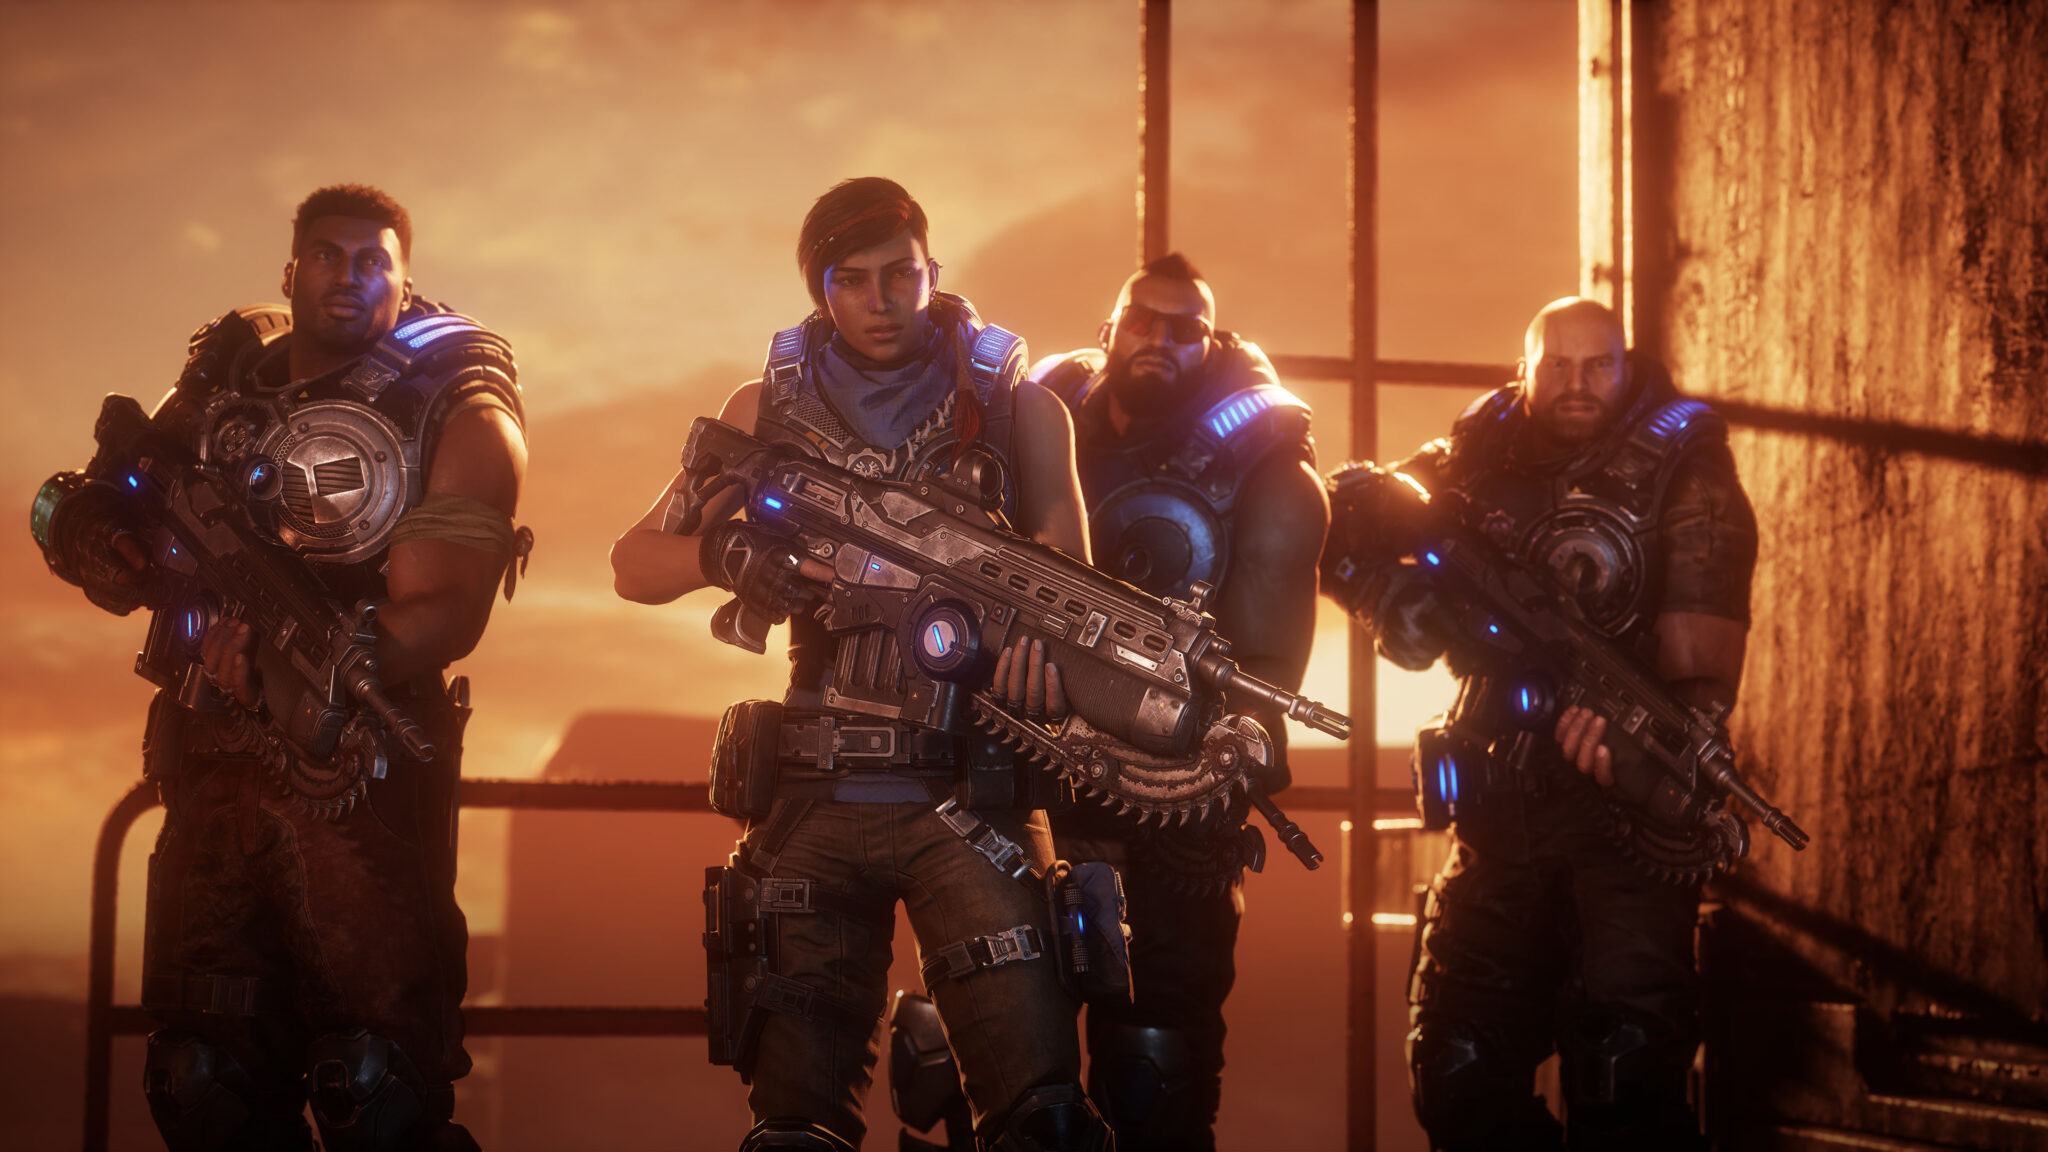 First Xbox Title, 'Gears 5,' Joins GeForce NOW